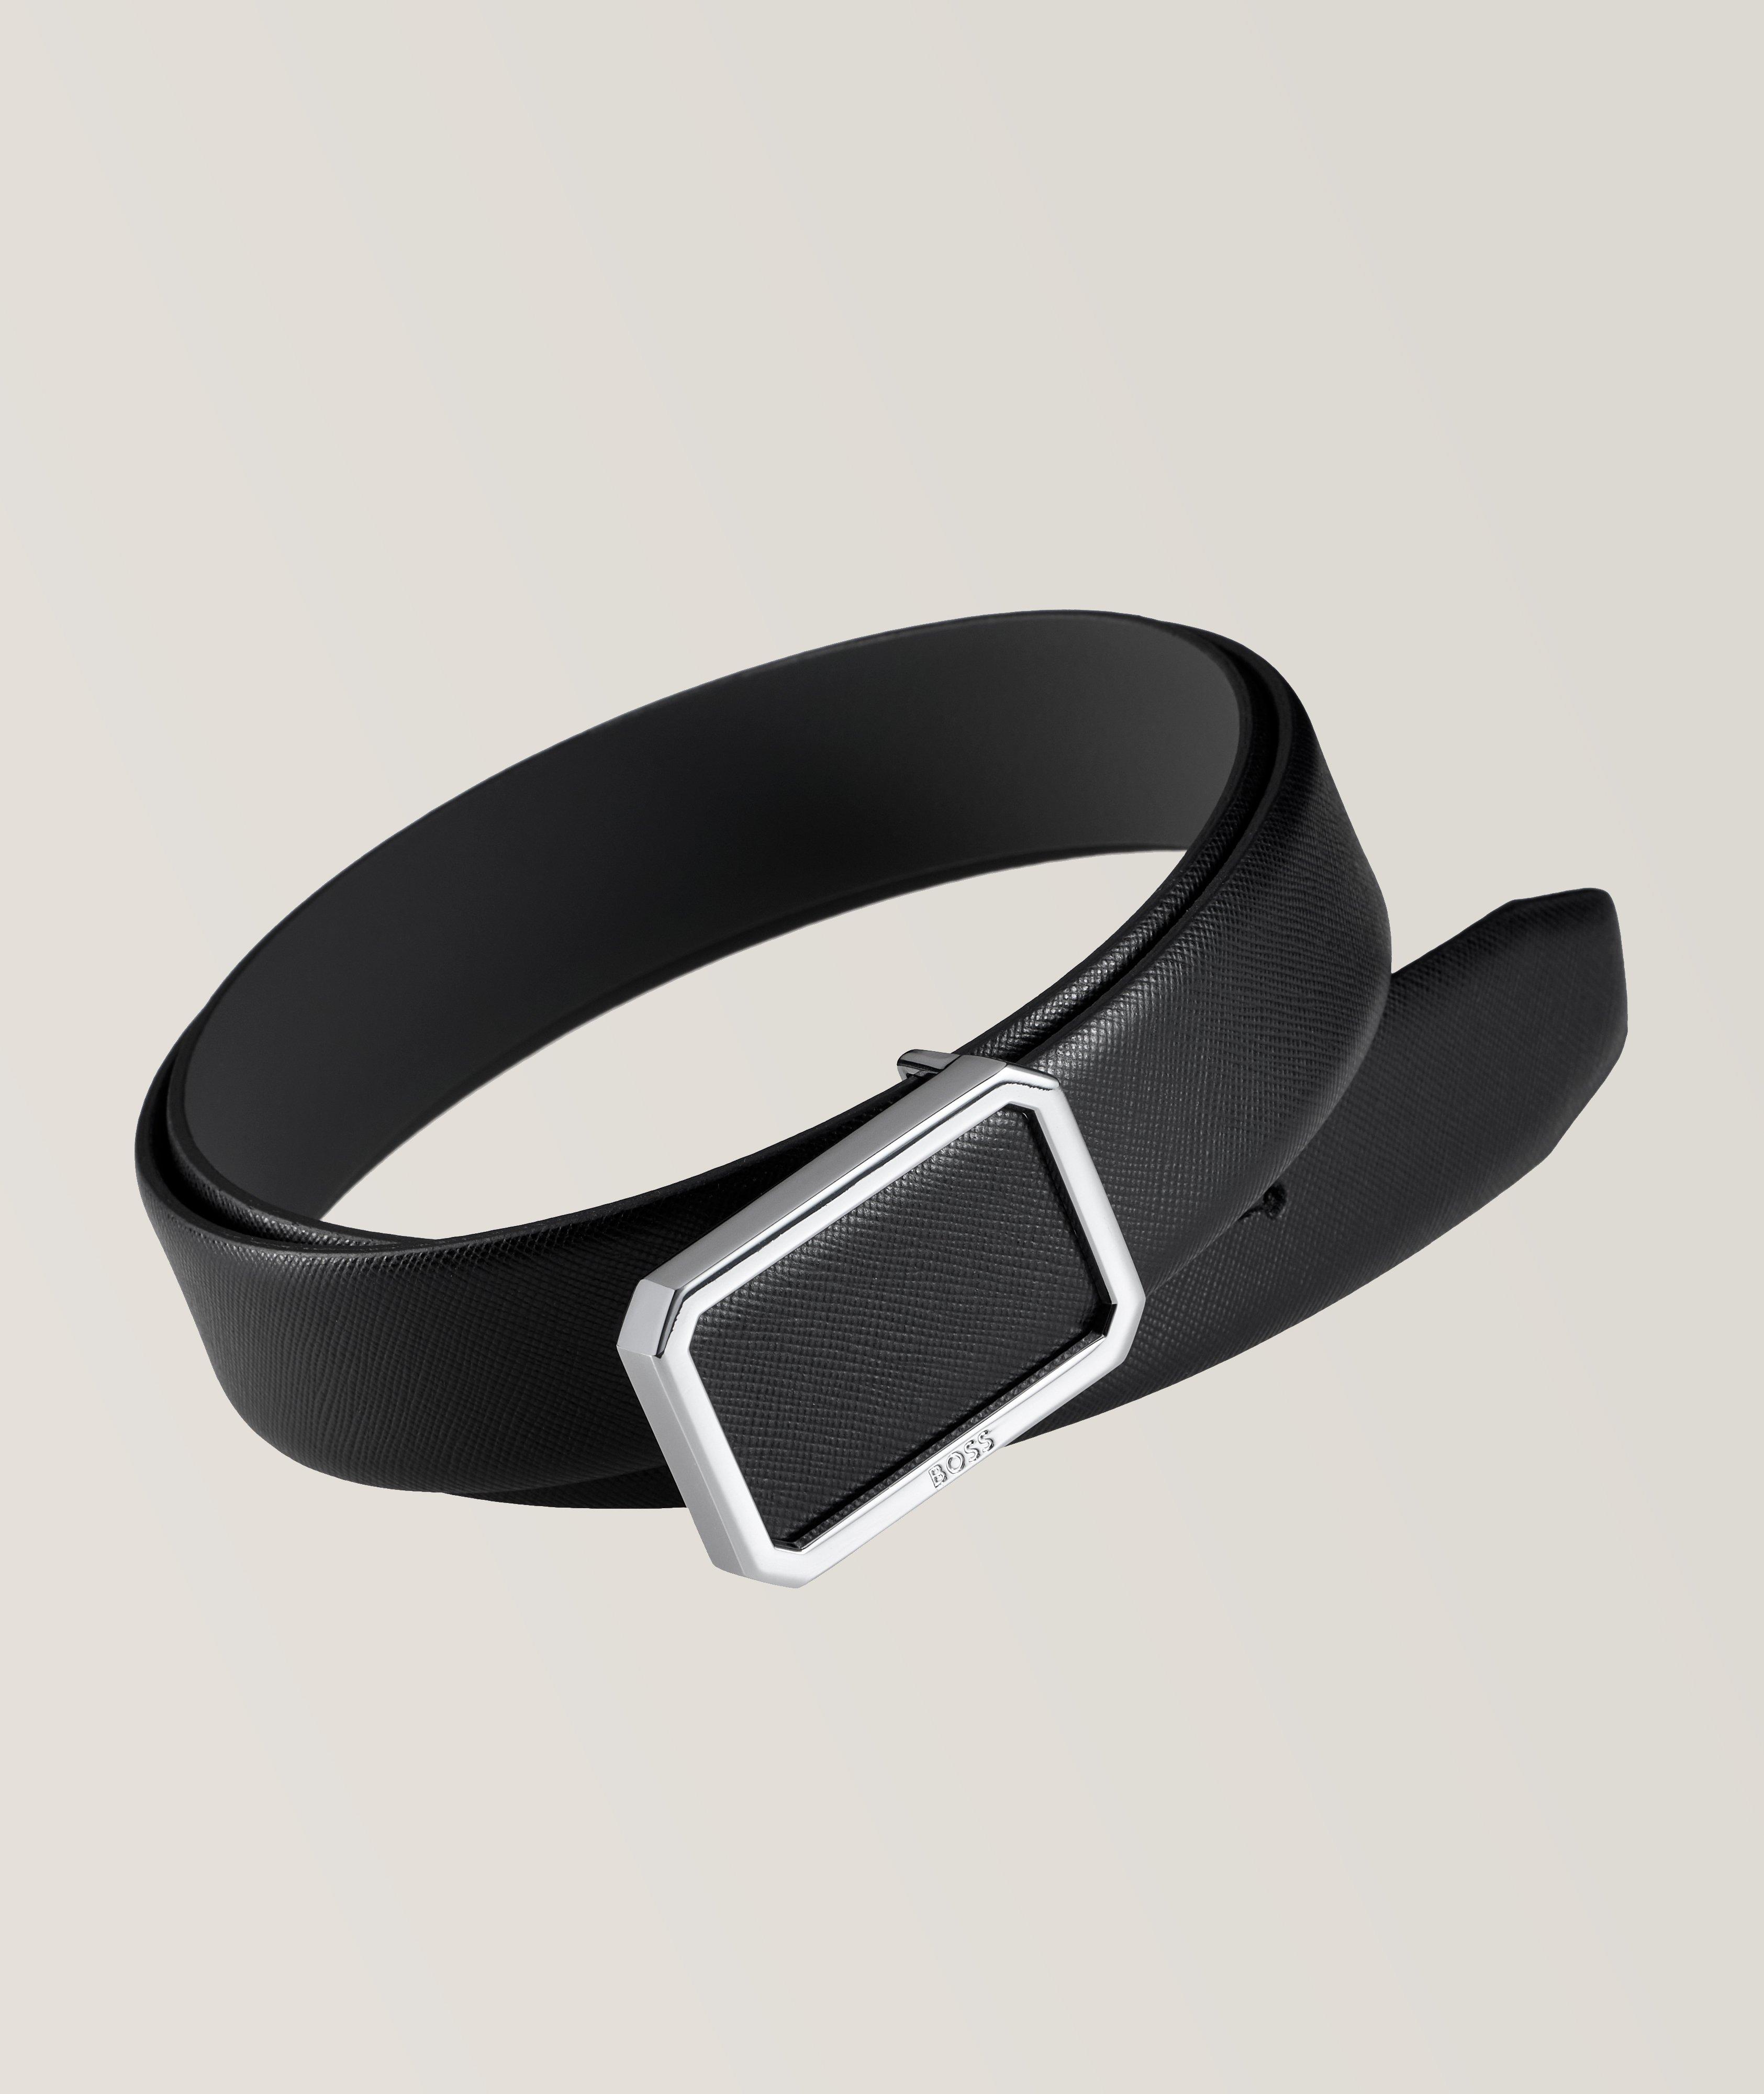 Saffiano Leather Pin-Buckle Belt image 0